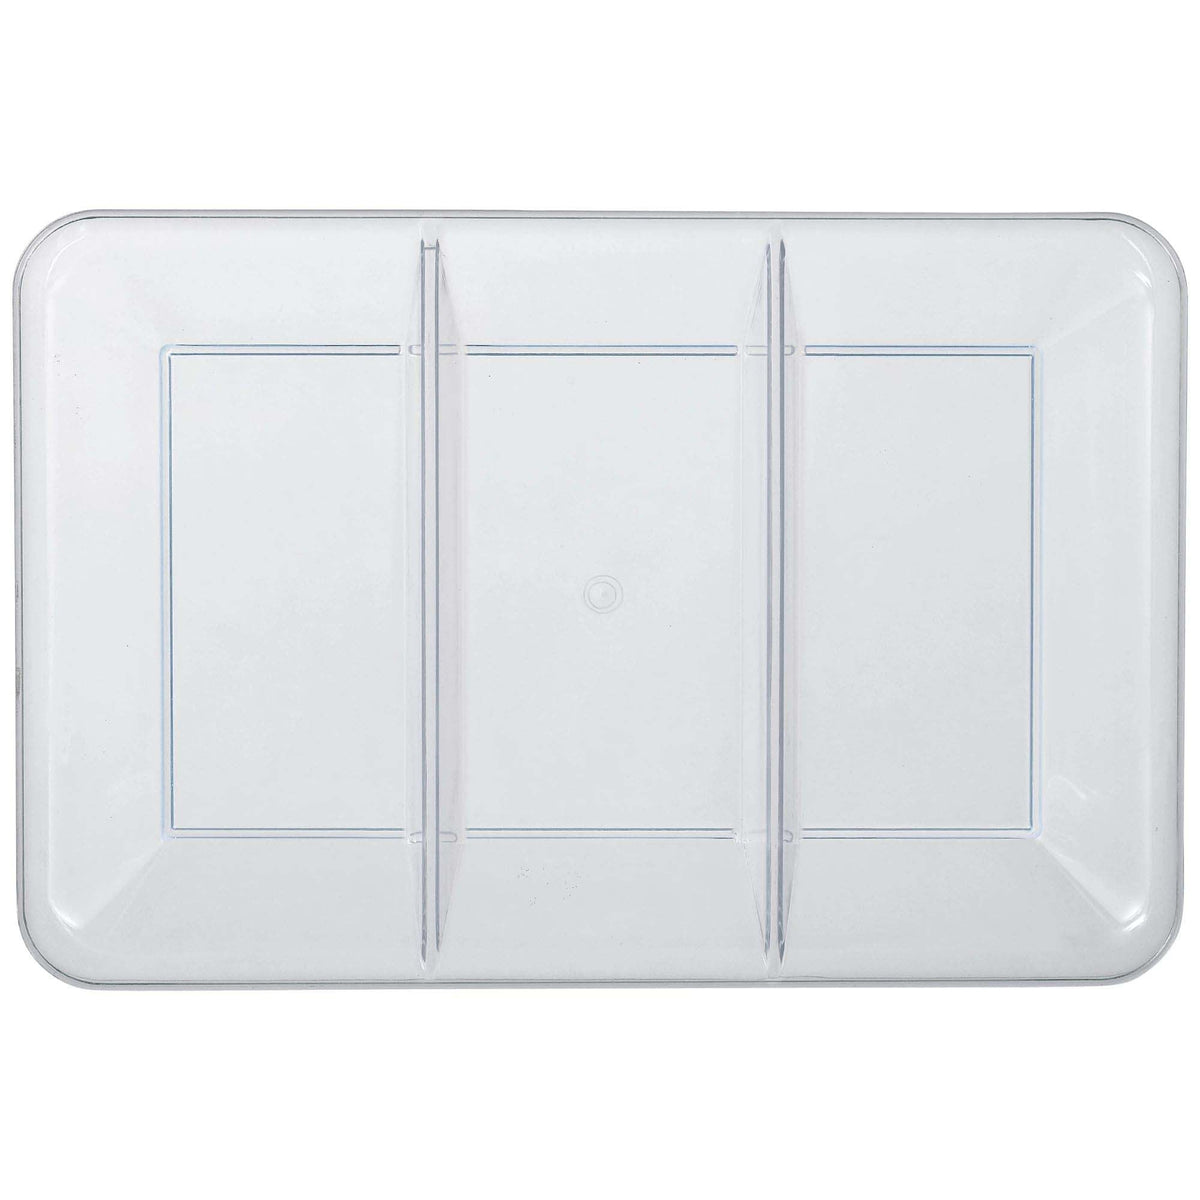 AMSCAN CA Disposable-Plasticware Compartment Tray, Clear, 9.5 x 14 Inches, 1 Count